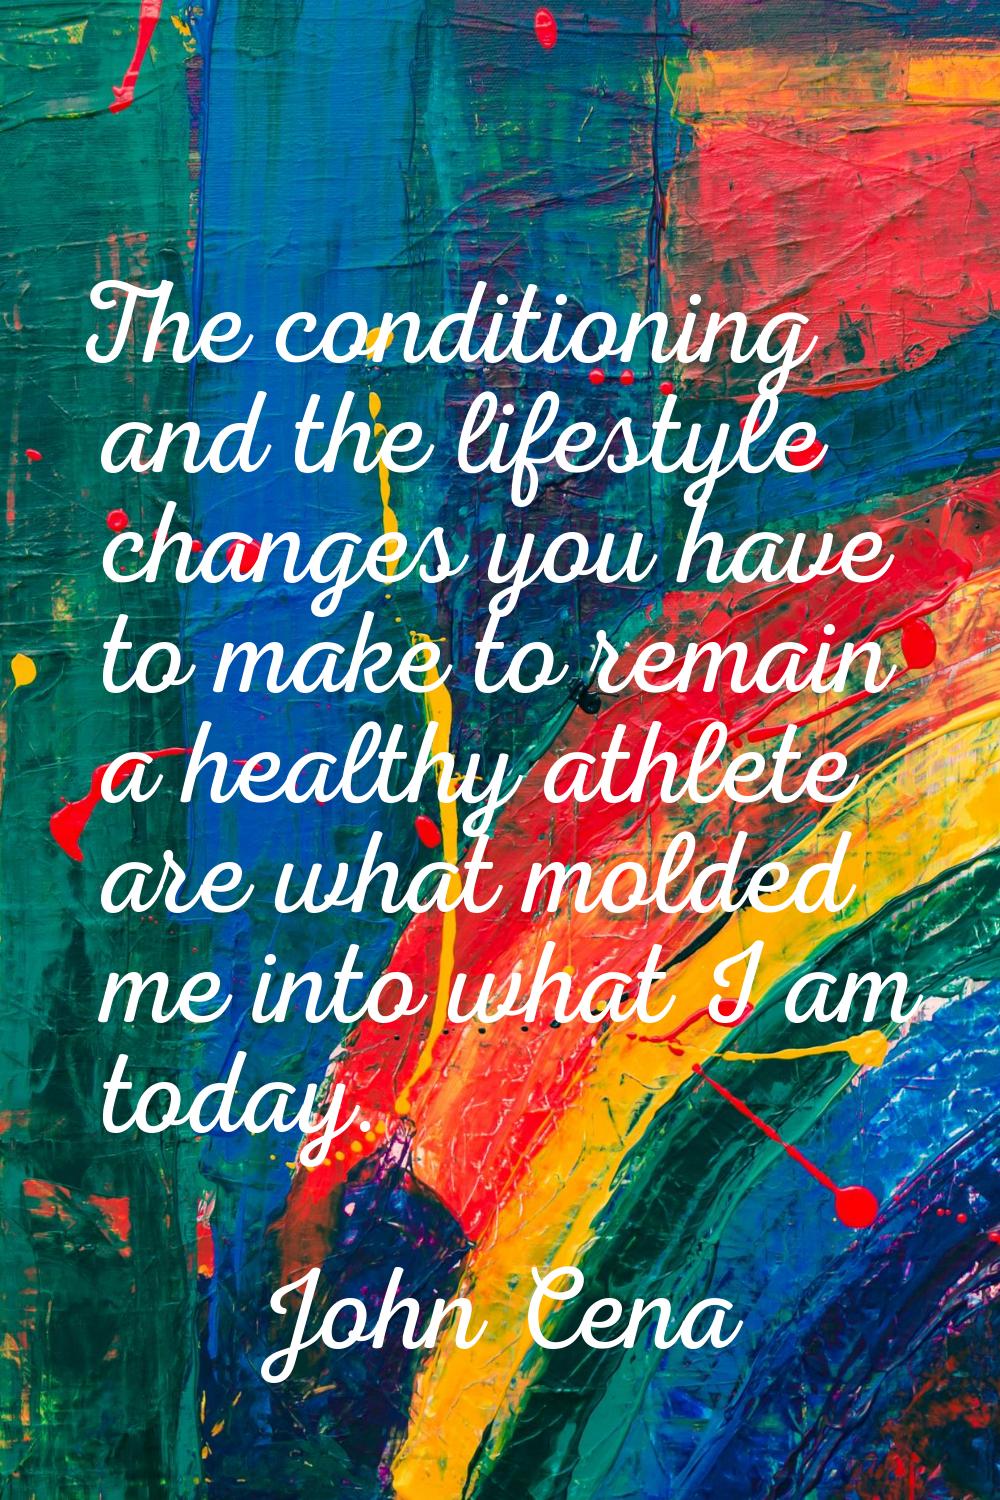 The conditioning and the lifestyle changes you have to make to remain a healthy athlete are what mo